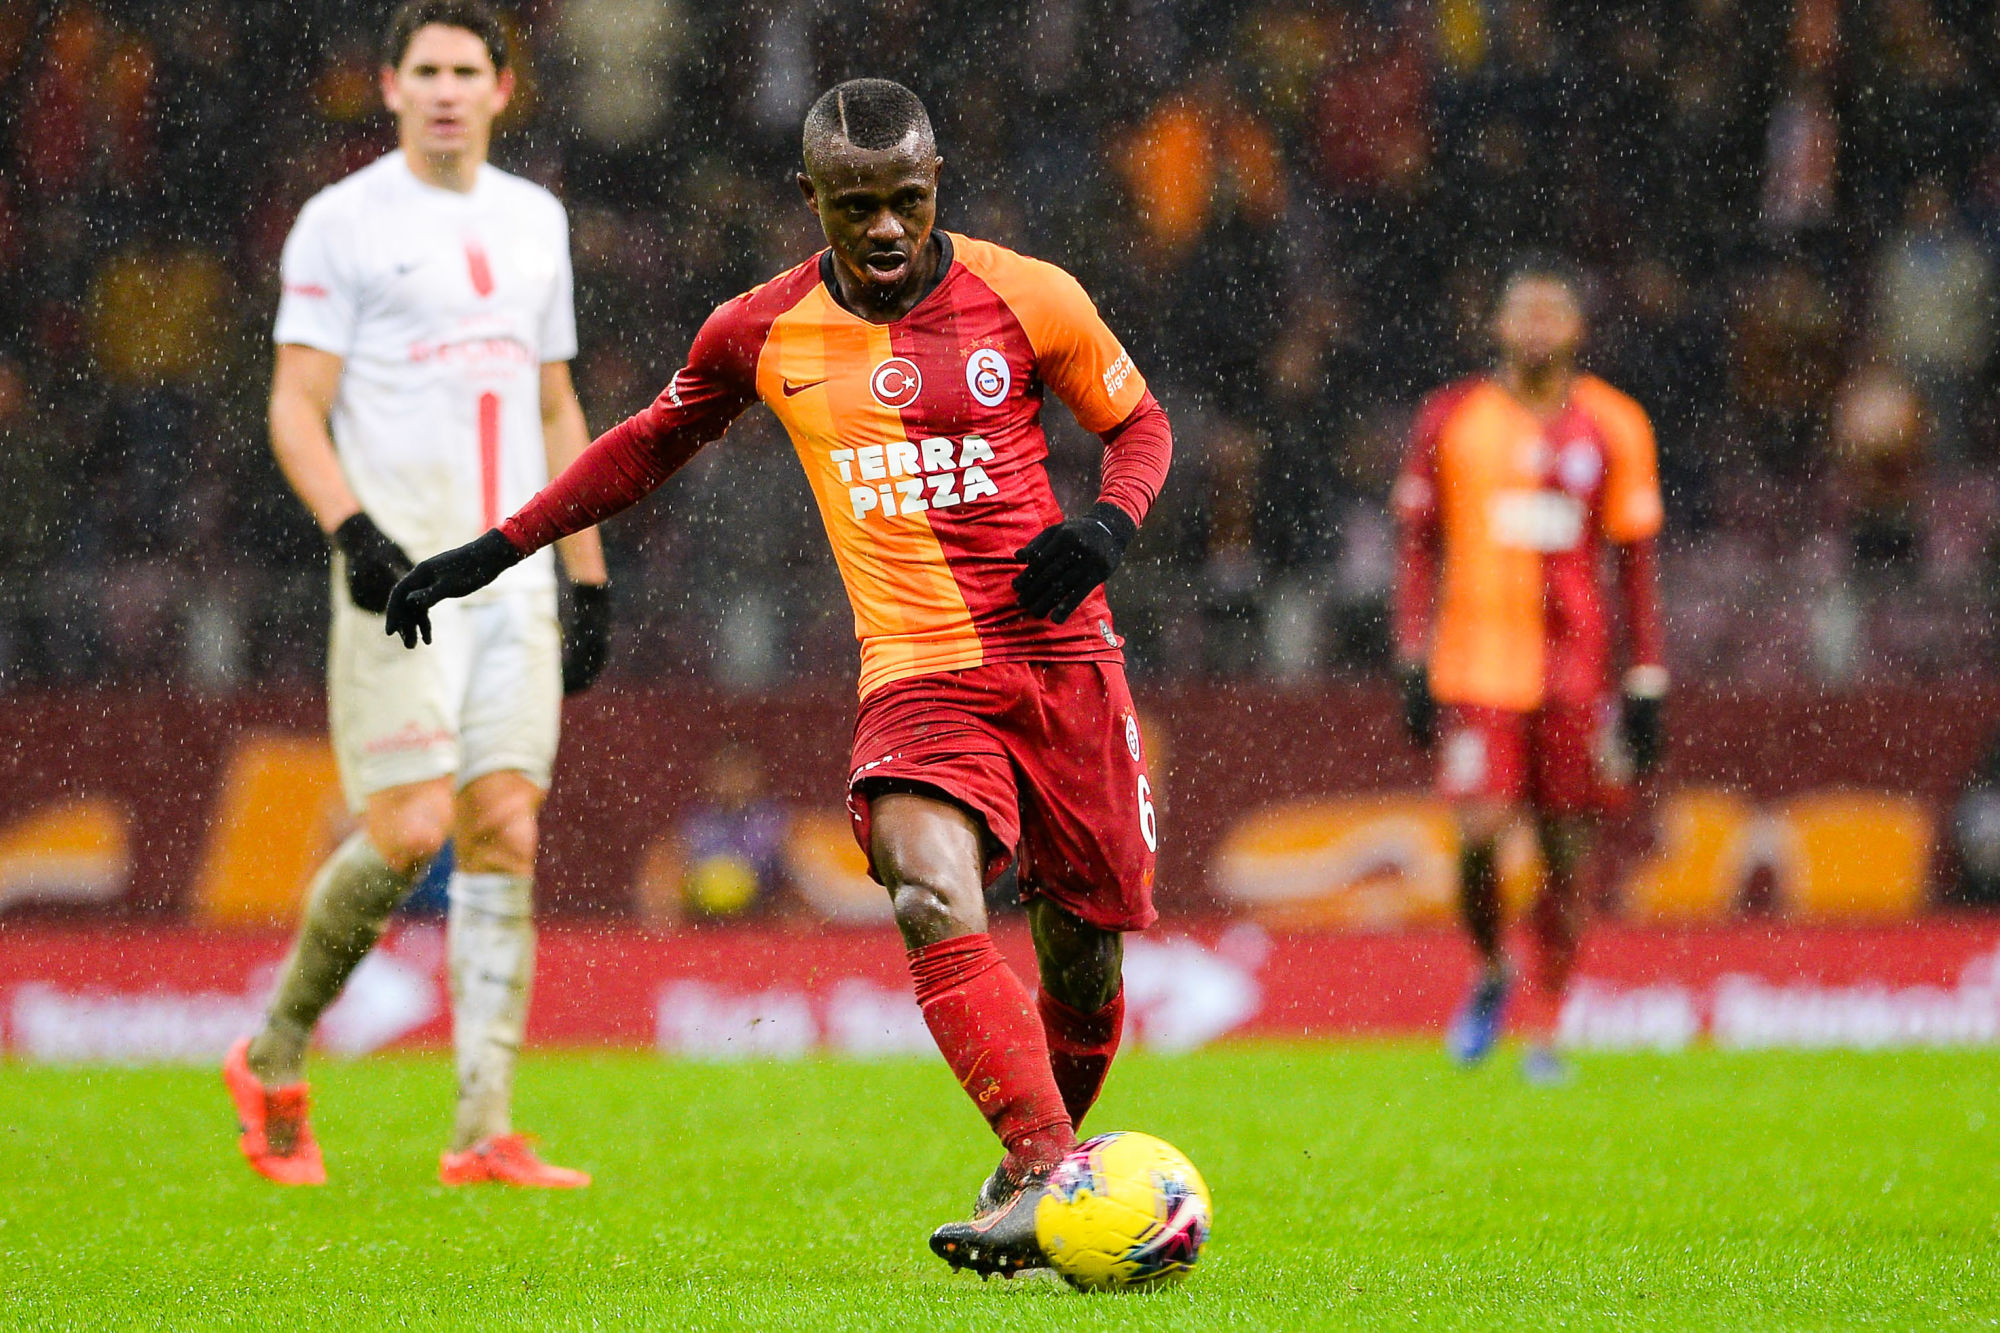 Jean Michael Seri of Galatasaray during the Turkish Super league football match between Galatasaray and Antalyaspor at Turk Telekom Arena Stadium in Istanbul , Turkey on December 28 , 2019. 

Photo by Icon Sport - Jean Michael SERI - Turk Telekom Arena - Istanbul (Turquie)